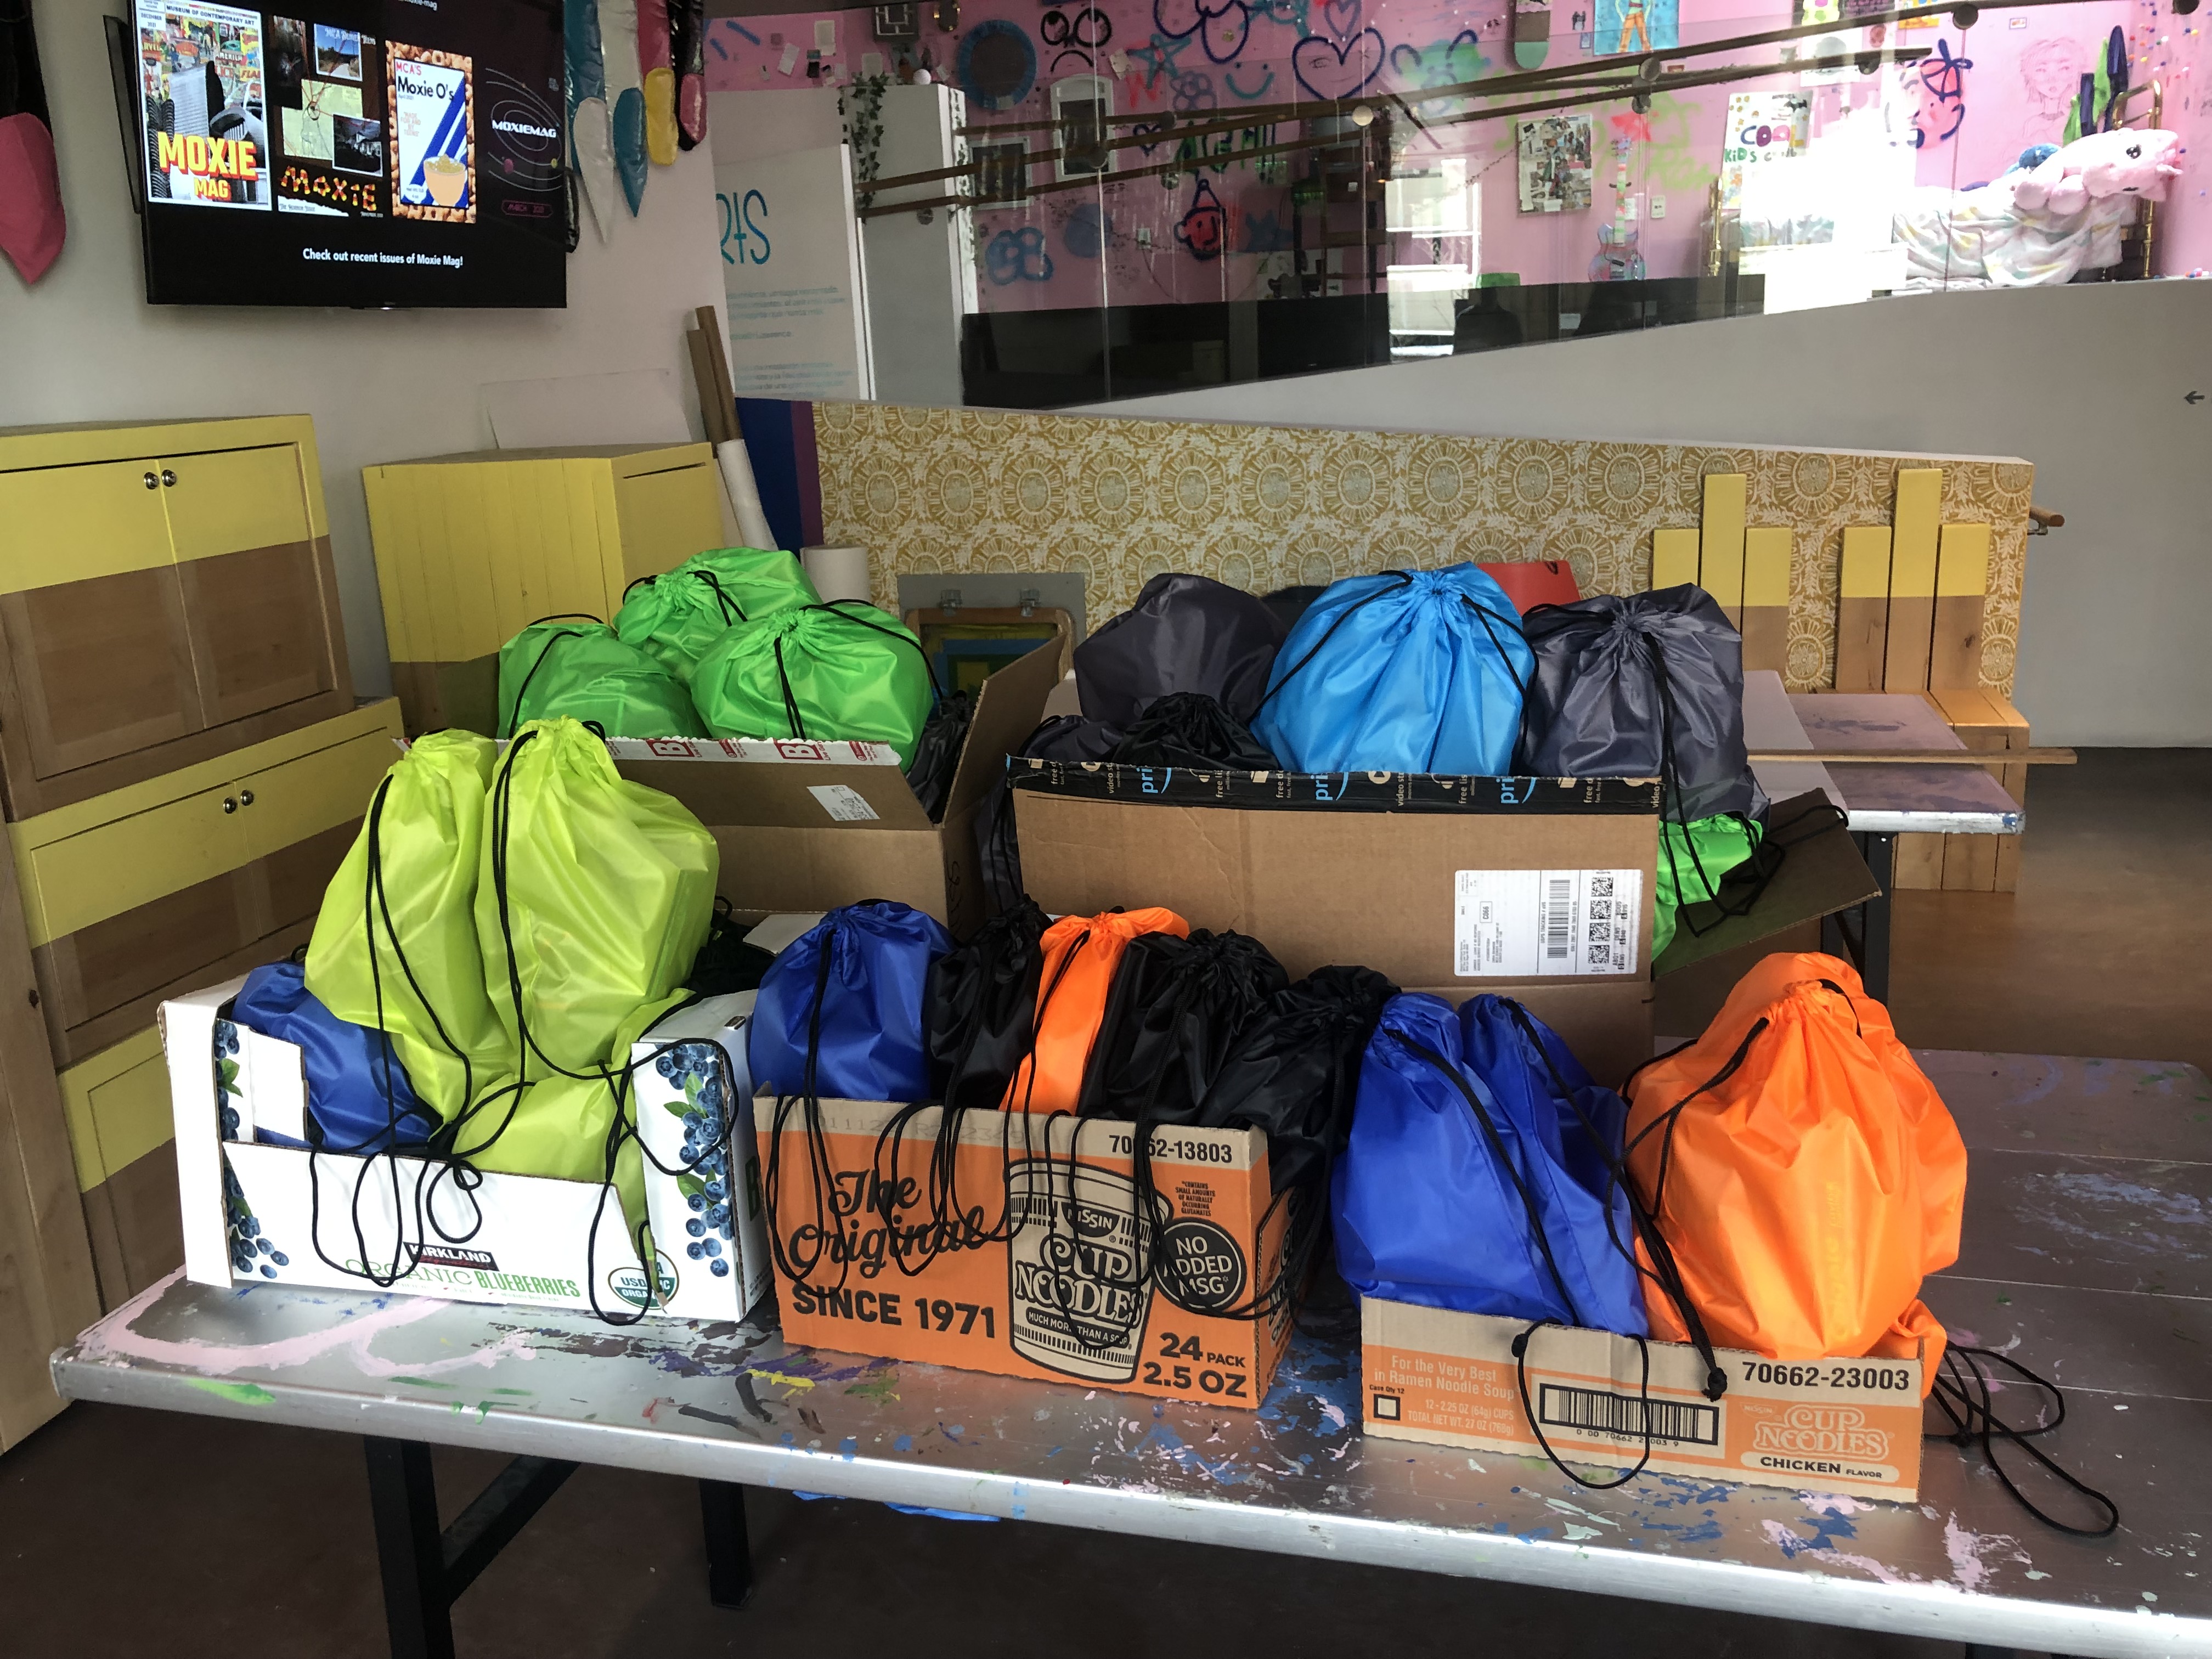 Colorful drawstring bags in a cardboard boxes.